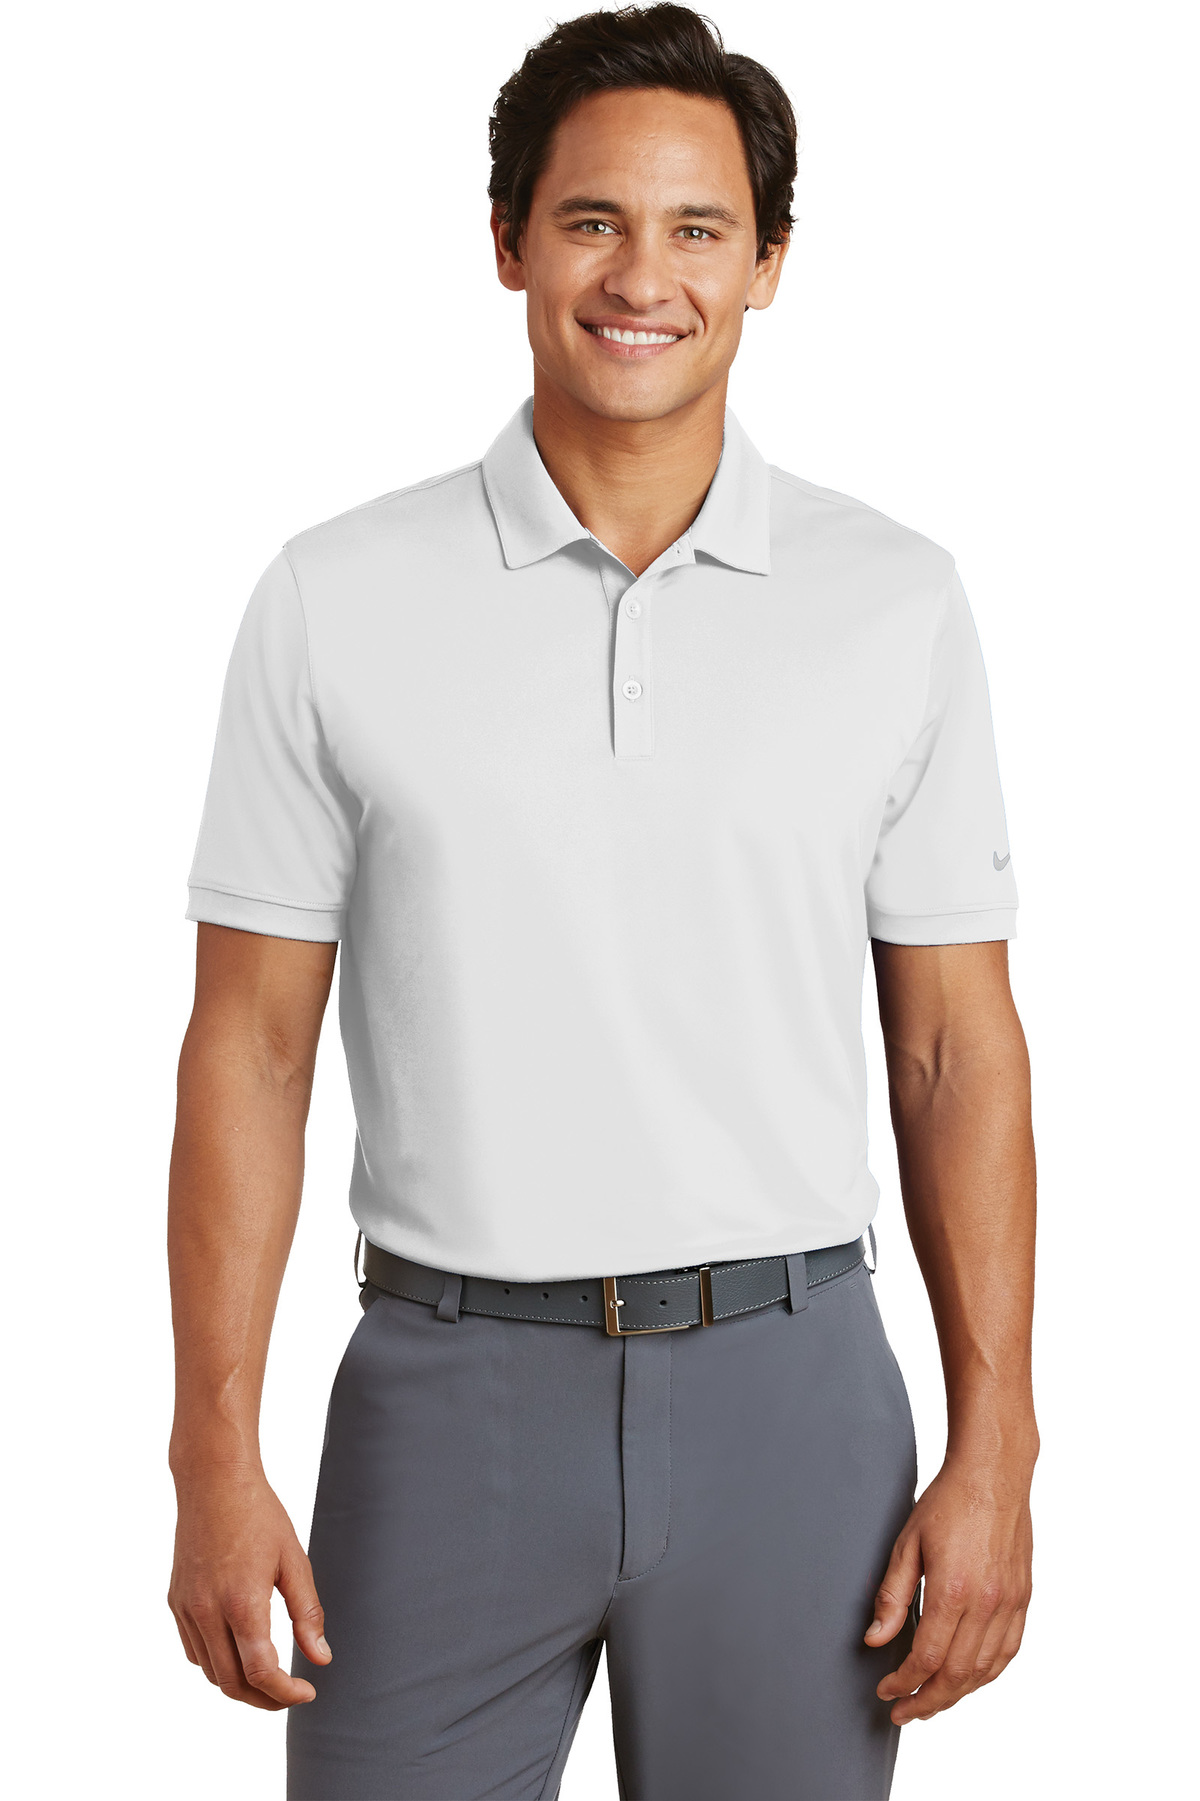 Nike Golf Embroidered Men's Dri-FIT Players Modern Fit Polo - Queensboro